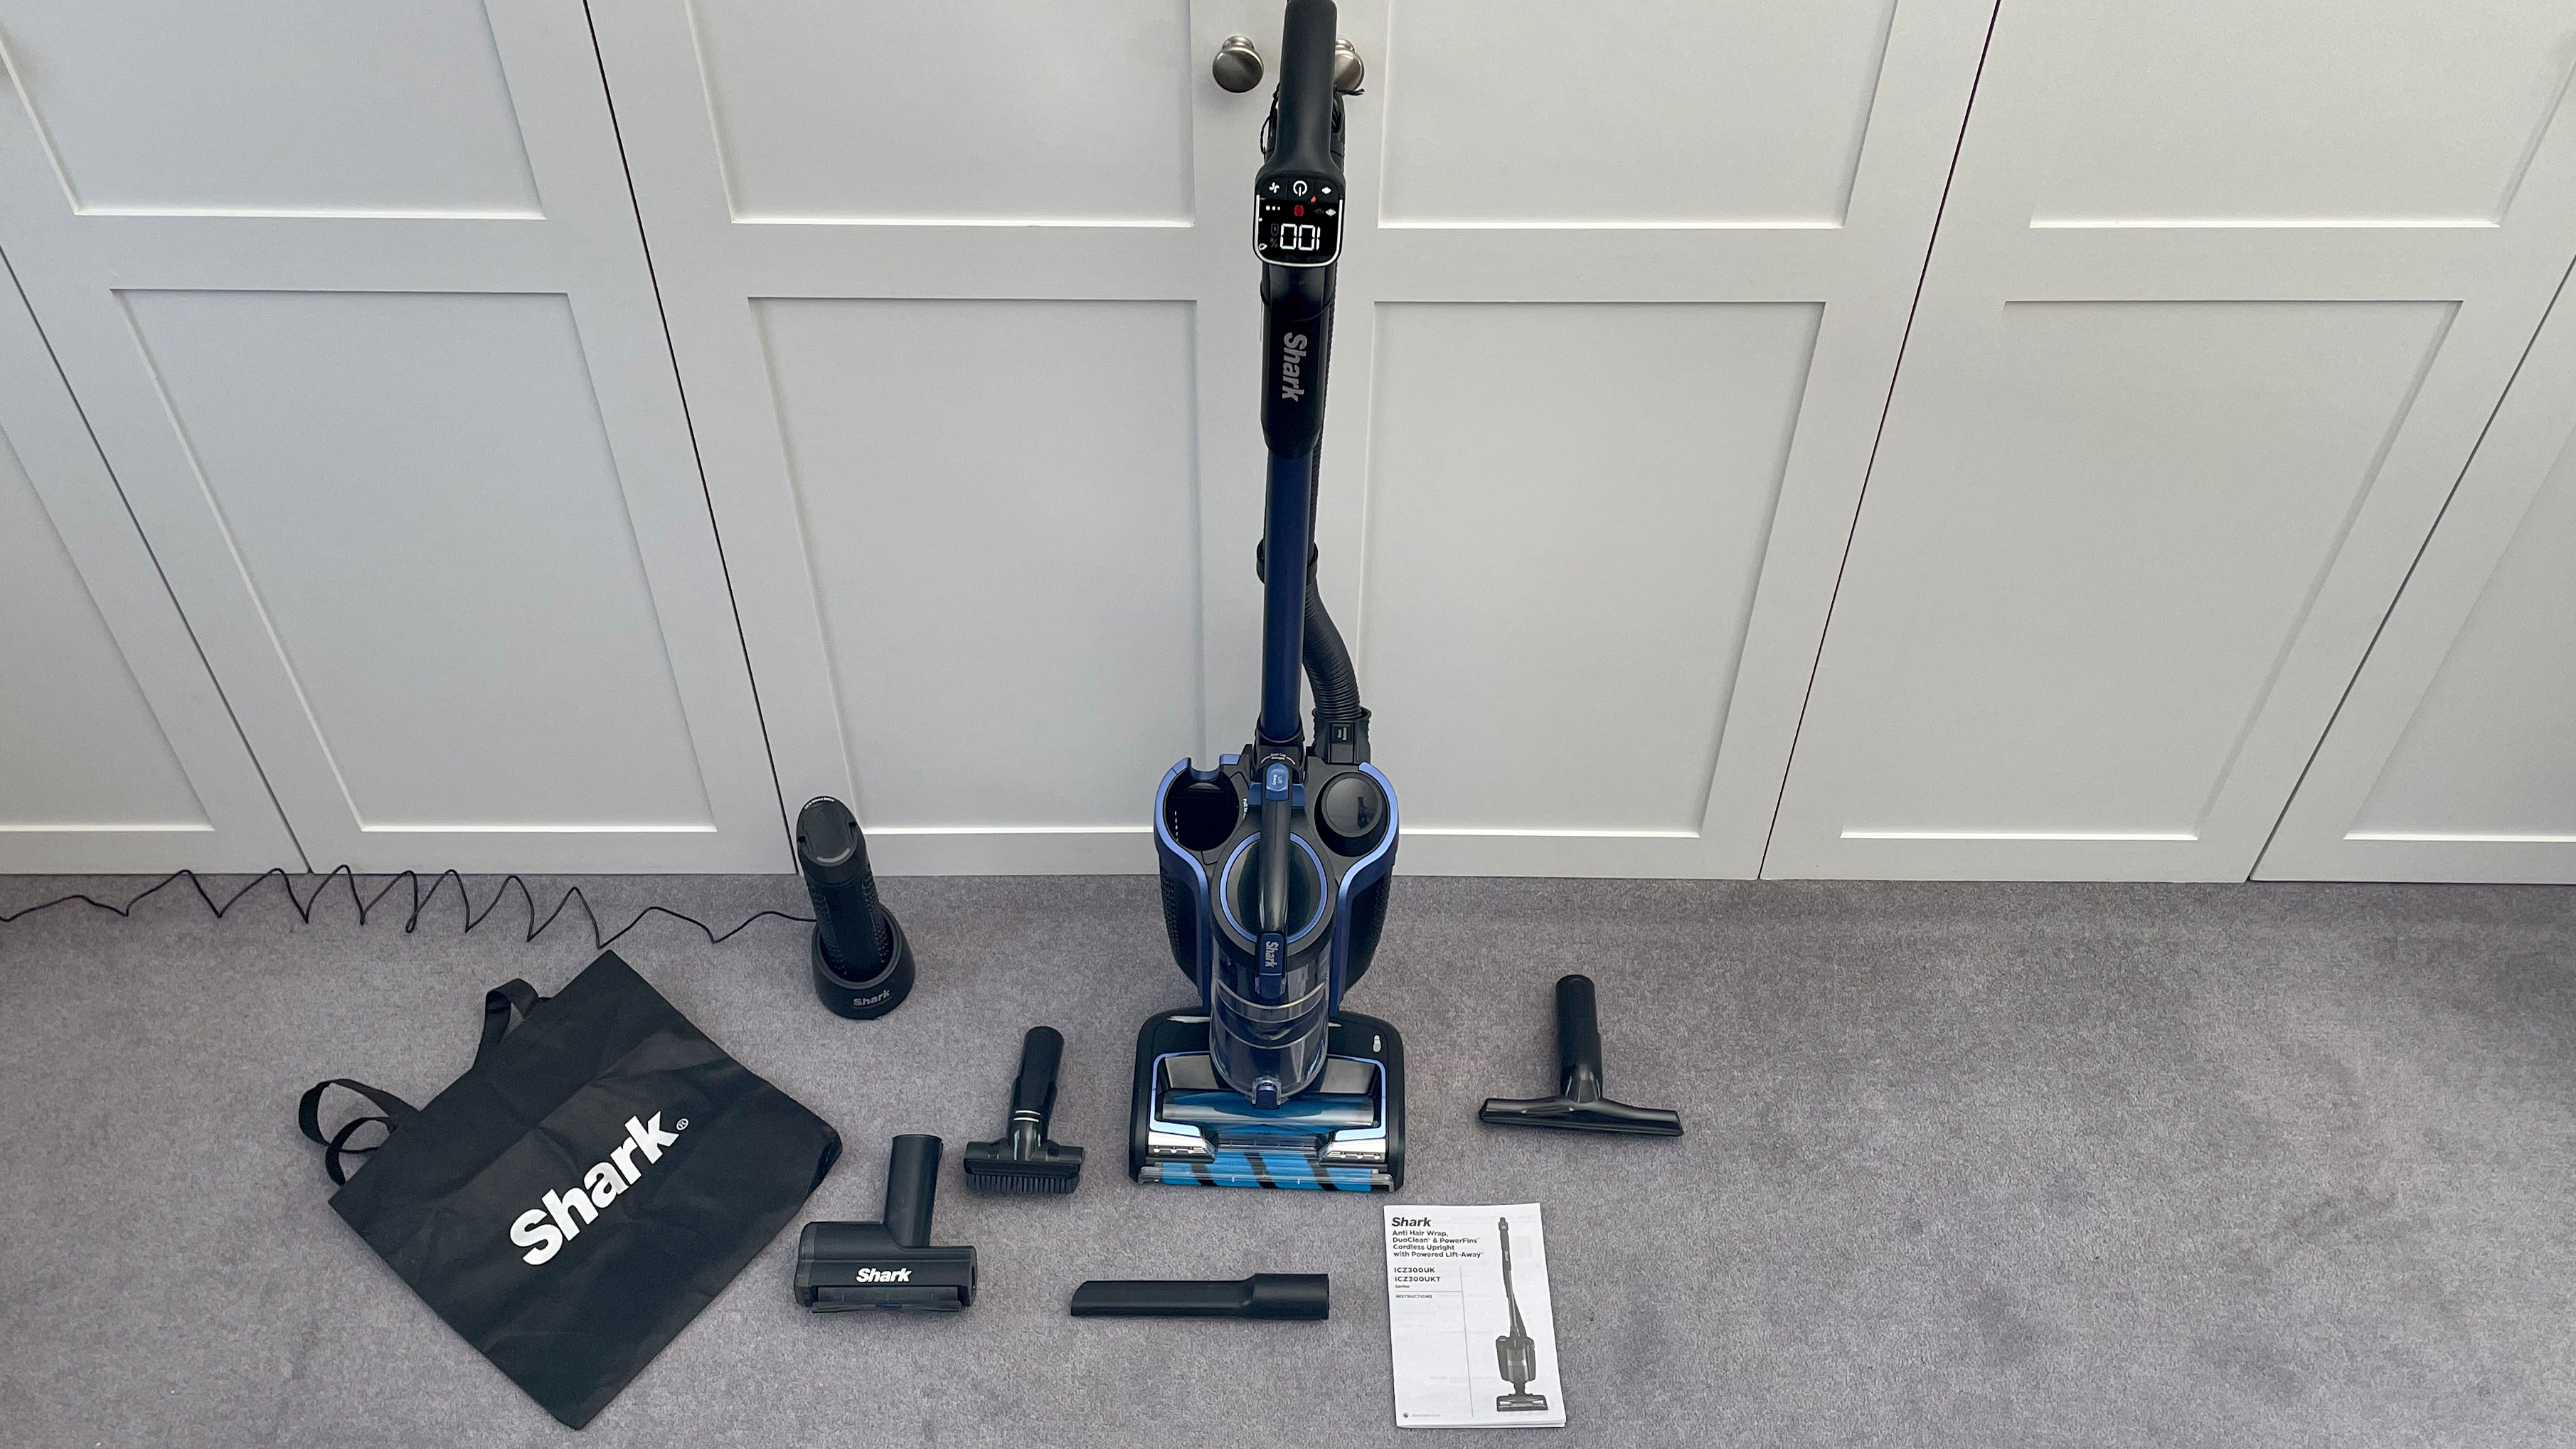 The Shark Anti Hair Wrap Cordless Upright Vacuum Cleaner with PowerFins, Powered Lift-Away & TruePet ICZ300UKT surrounded by all its accessories